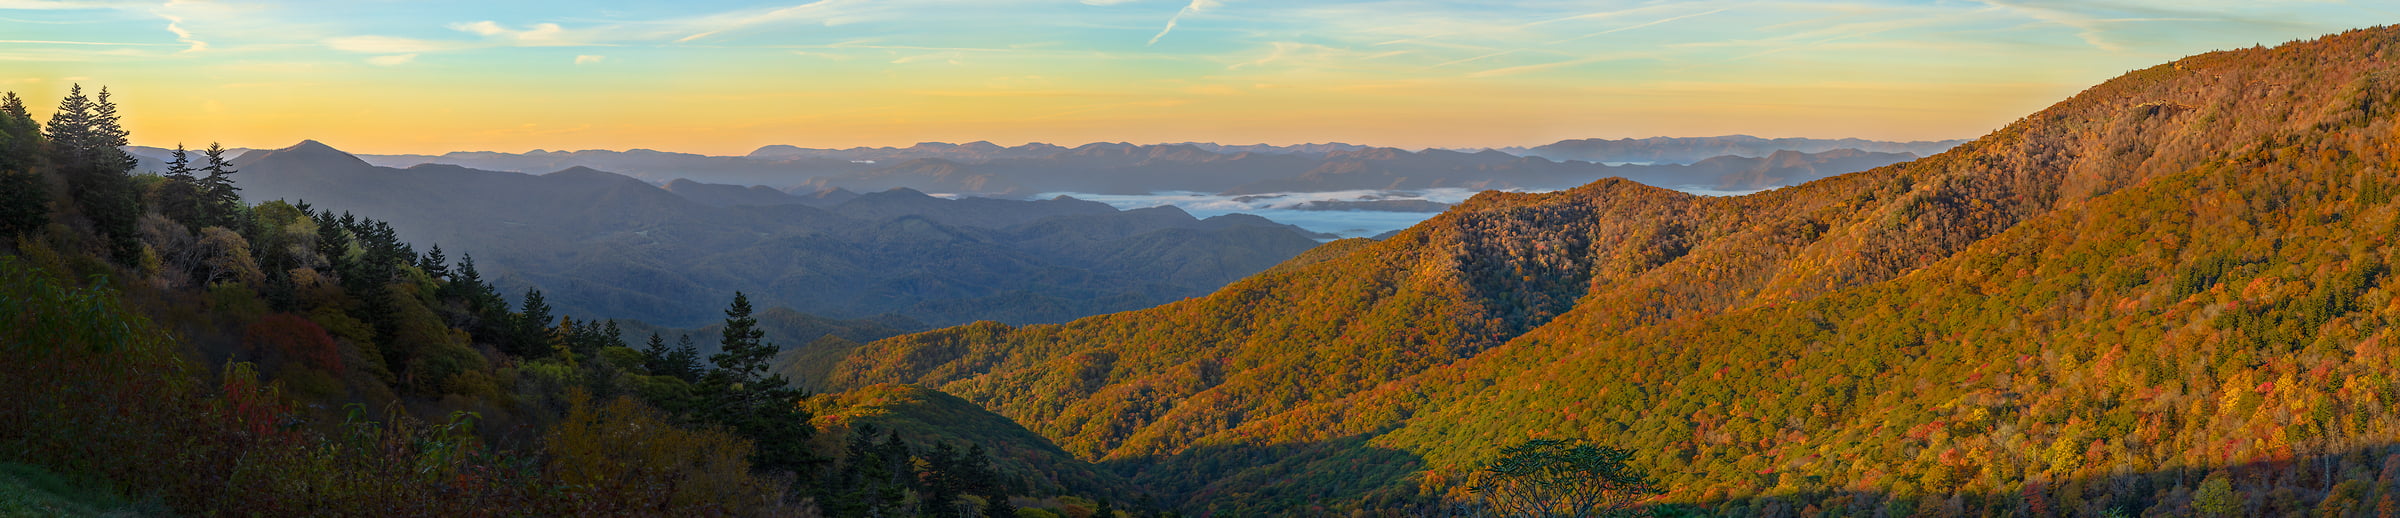 1,150 megapixels! A very high resolution landscape photo of the Blue Ridge Mountains; photograph created by John Freeman in Mile Post 450.2, Blue Ridge Parkway, North Carolina